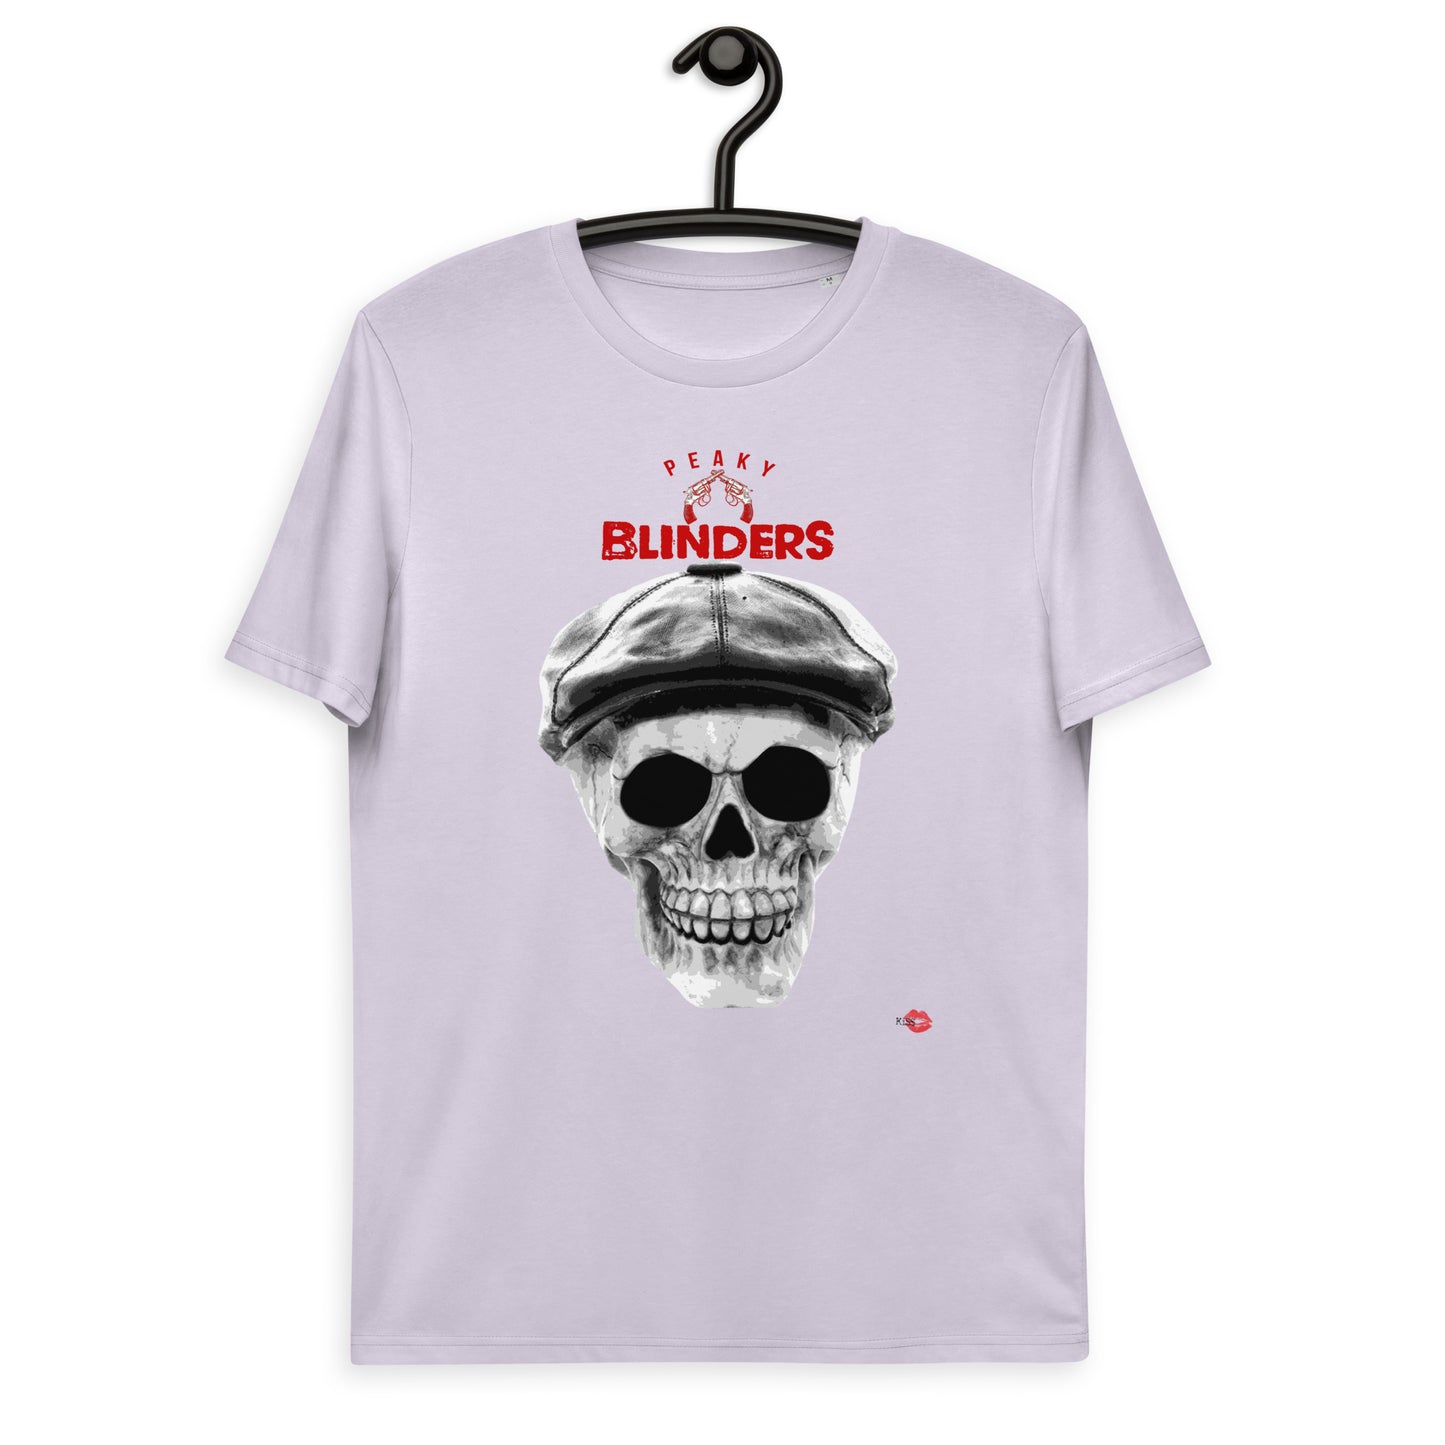 Peaky Blinders Skull KiSS Unisex organic cotton t-shirt - Tommy Shelby inspired tv show